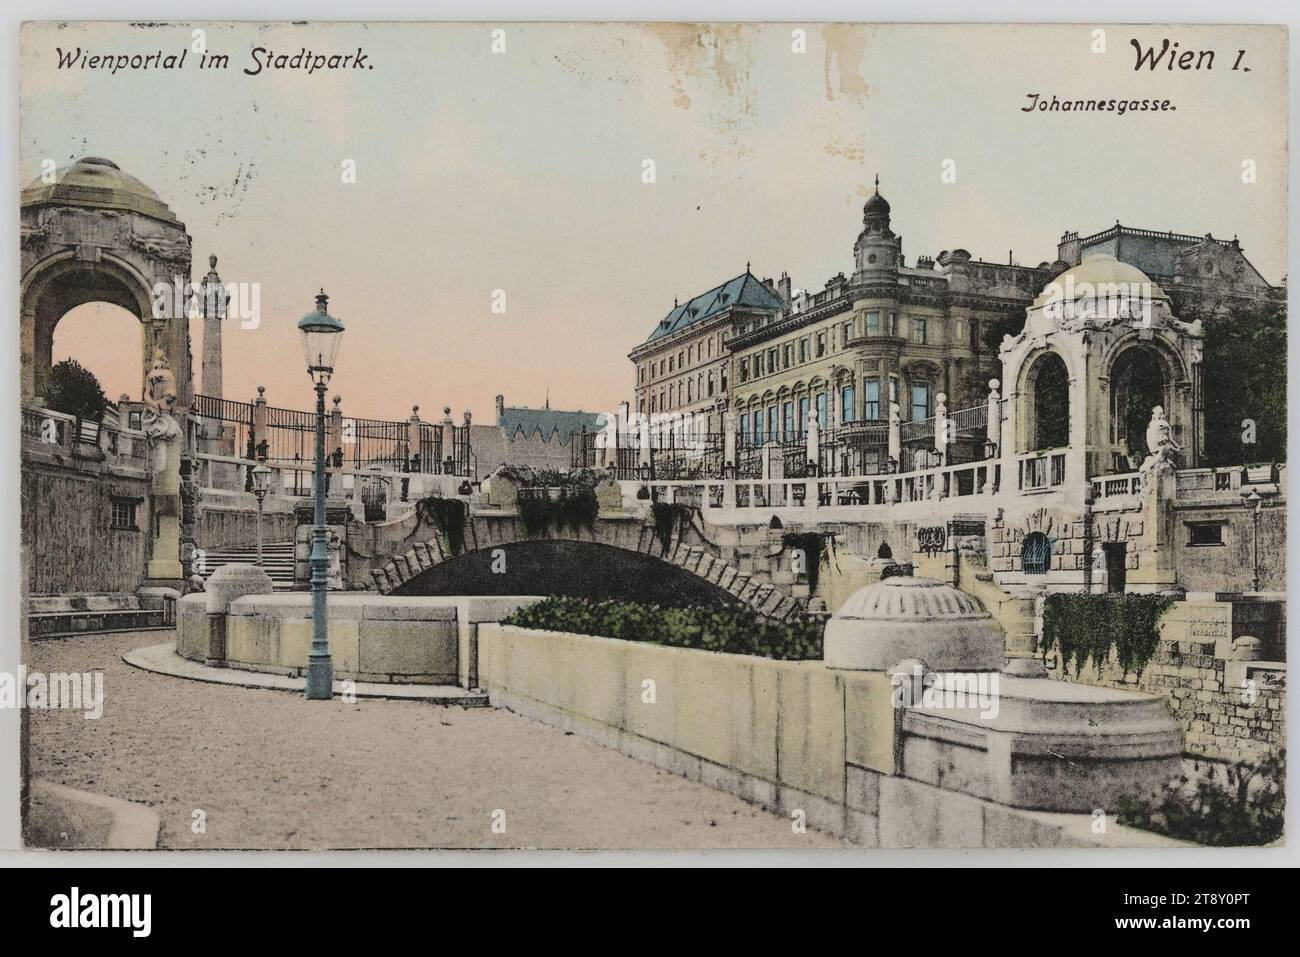 Wienfluss - im Stadtpark - Blick gegen Wienflussportal, picture postcard, Carl (Karl) Ledermann jun., Producer, 1908, paperboard, hand colorised, Collotype, Inscription, FROM, Wien, TO, Kalksburg, ADDRESS, Herr, [...], [...], Convikt, Convikt Kalksburg, MESSAGE, Dear Bruno!, on your birthday I send you my warmest congratulations, especially for the near future, Aunt Johanna is in Linz for a short time. Yesterday I took Bernhard and Hedwig for a walk, they are having a nice time now. Hopefully Werner is already feeling better. Greetings to you all from [...] [...], River Wien, Park Stock Photo